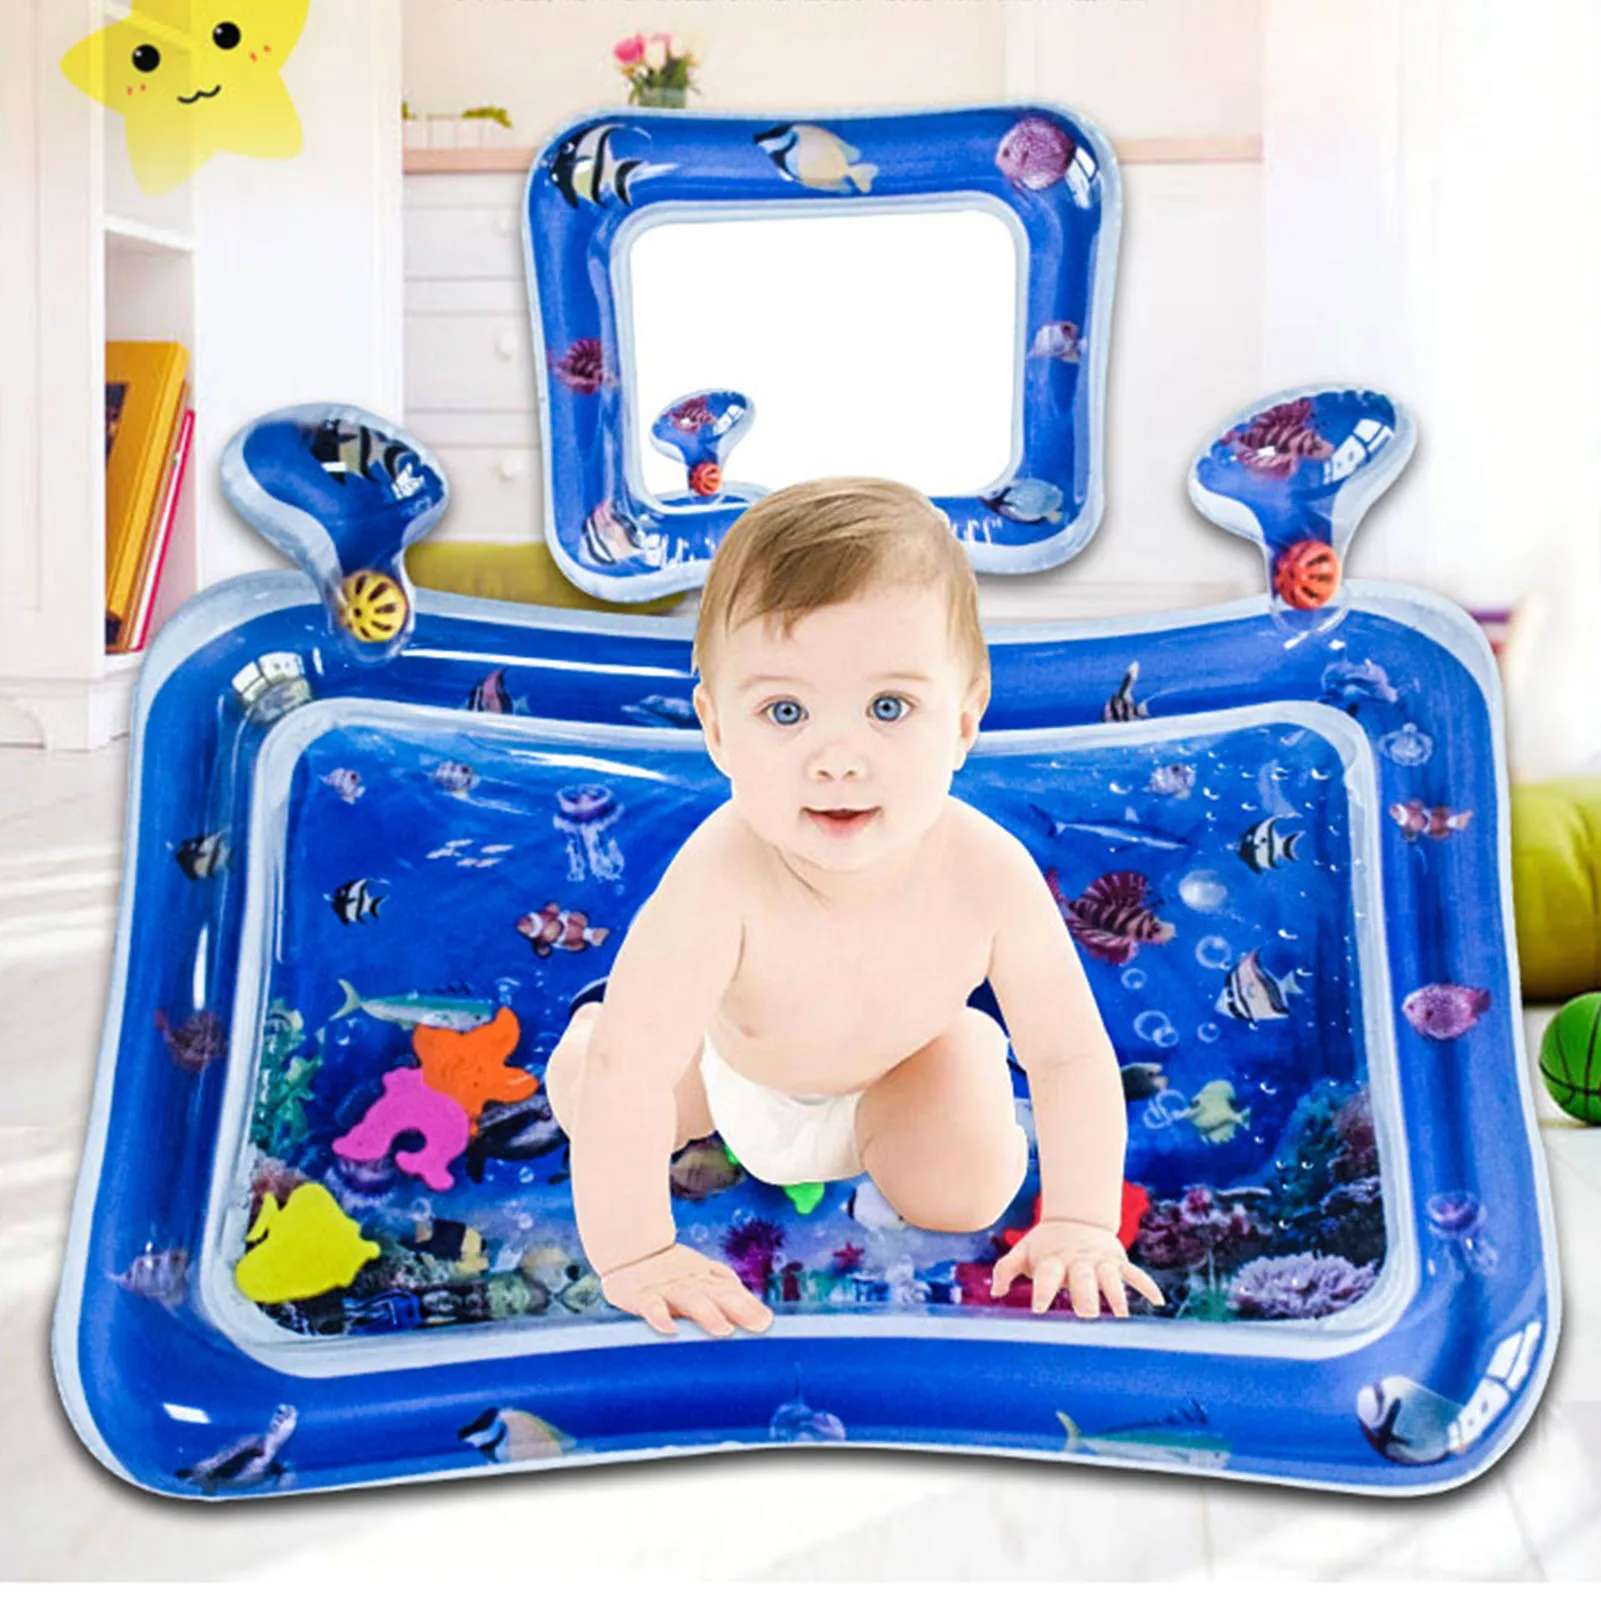 

New Infant Crawling Training Pat Pad PVC Inflatable Water Filled Play Mat Square Marine Life Jellyfish Cushion With Mirror